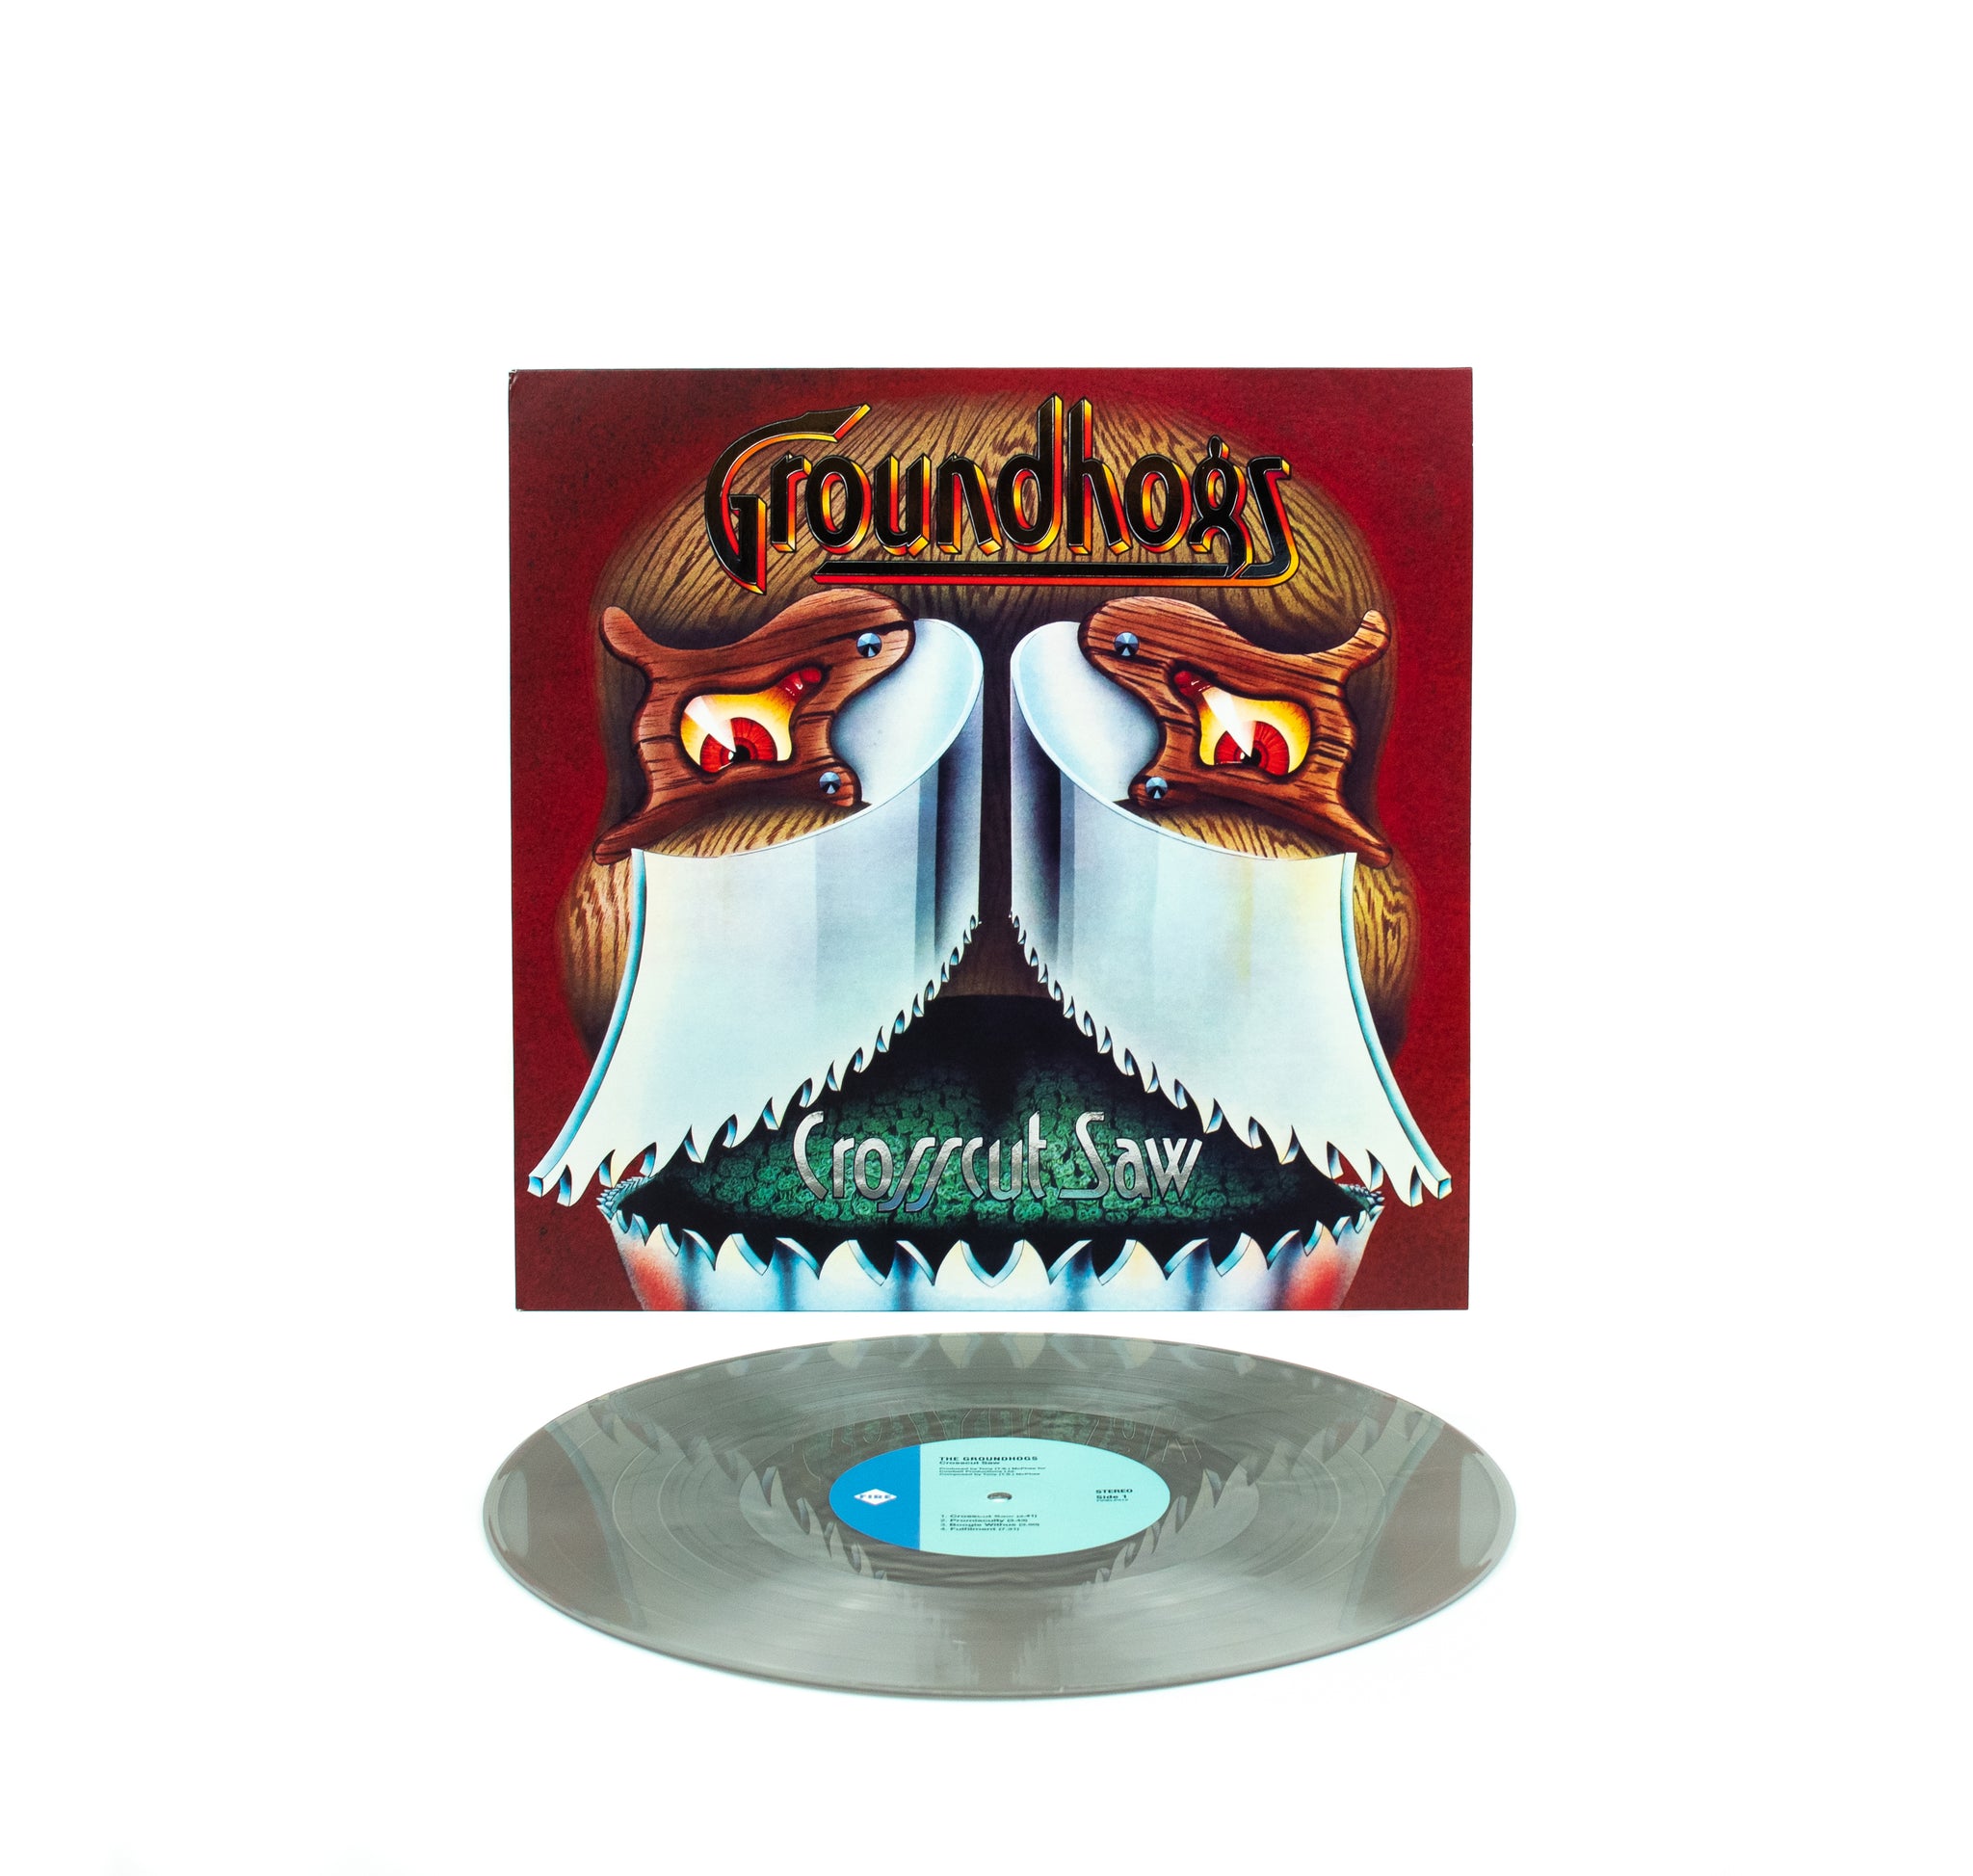 The Groundhogs - Crosscut Saw